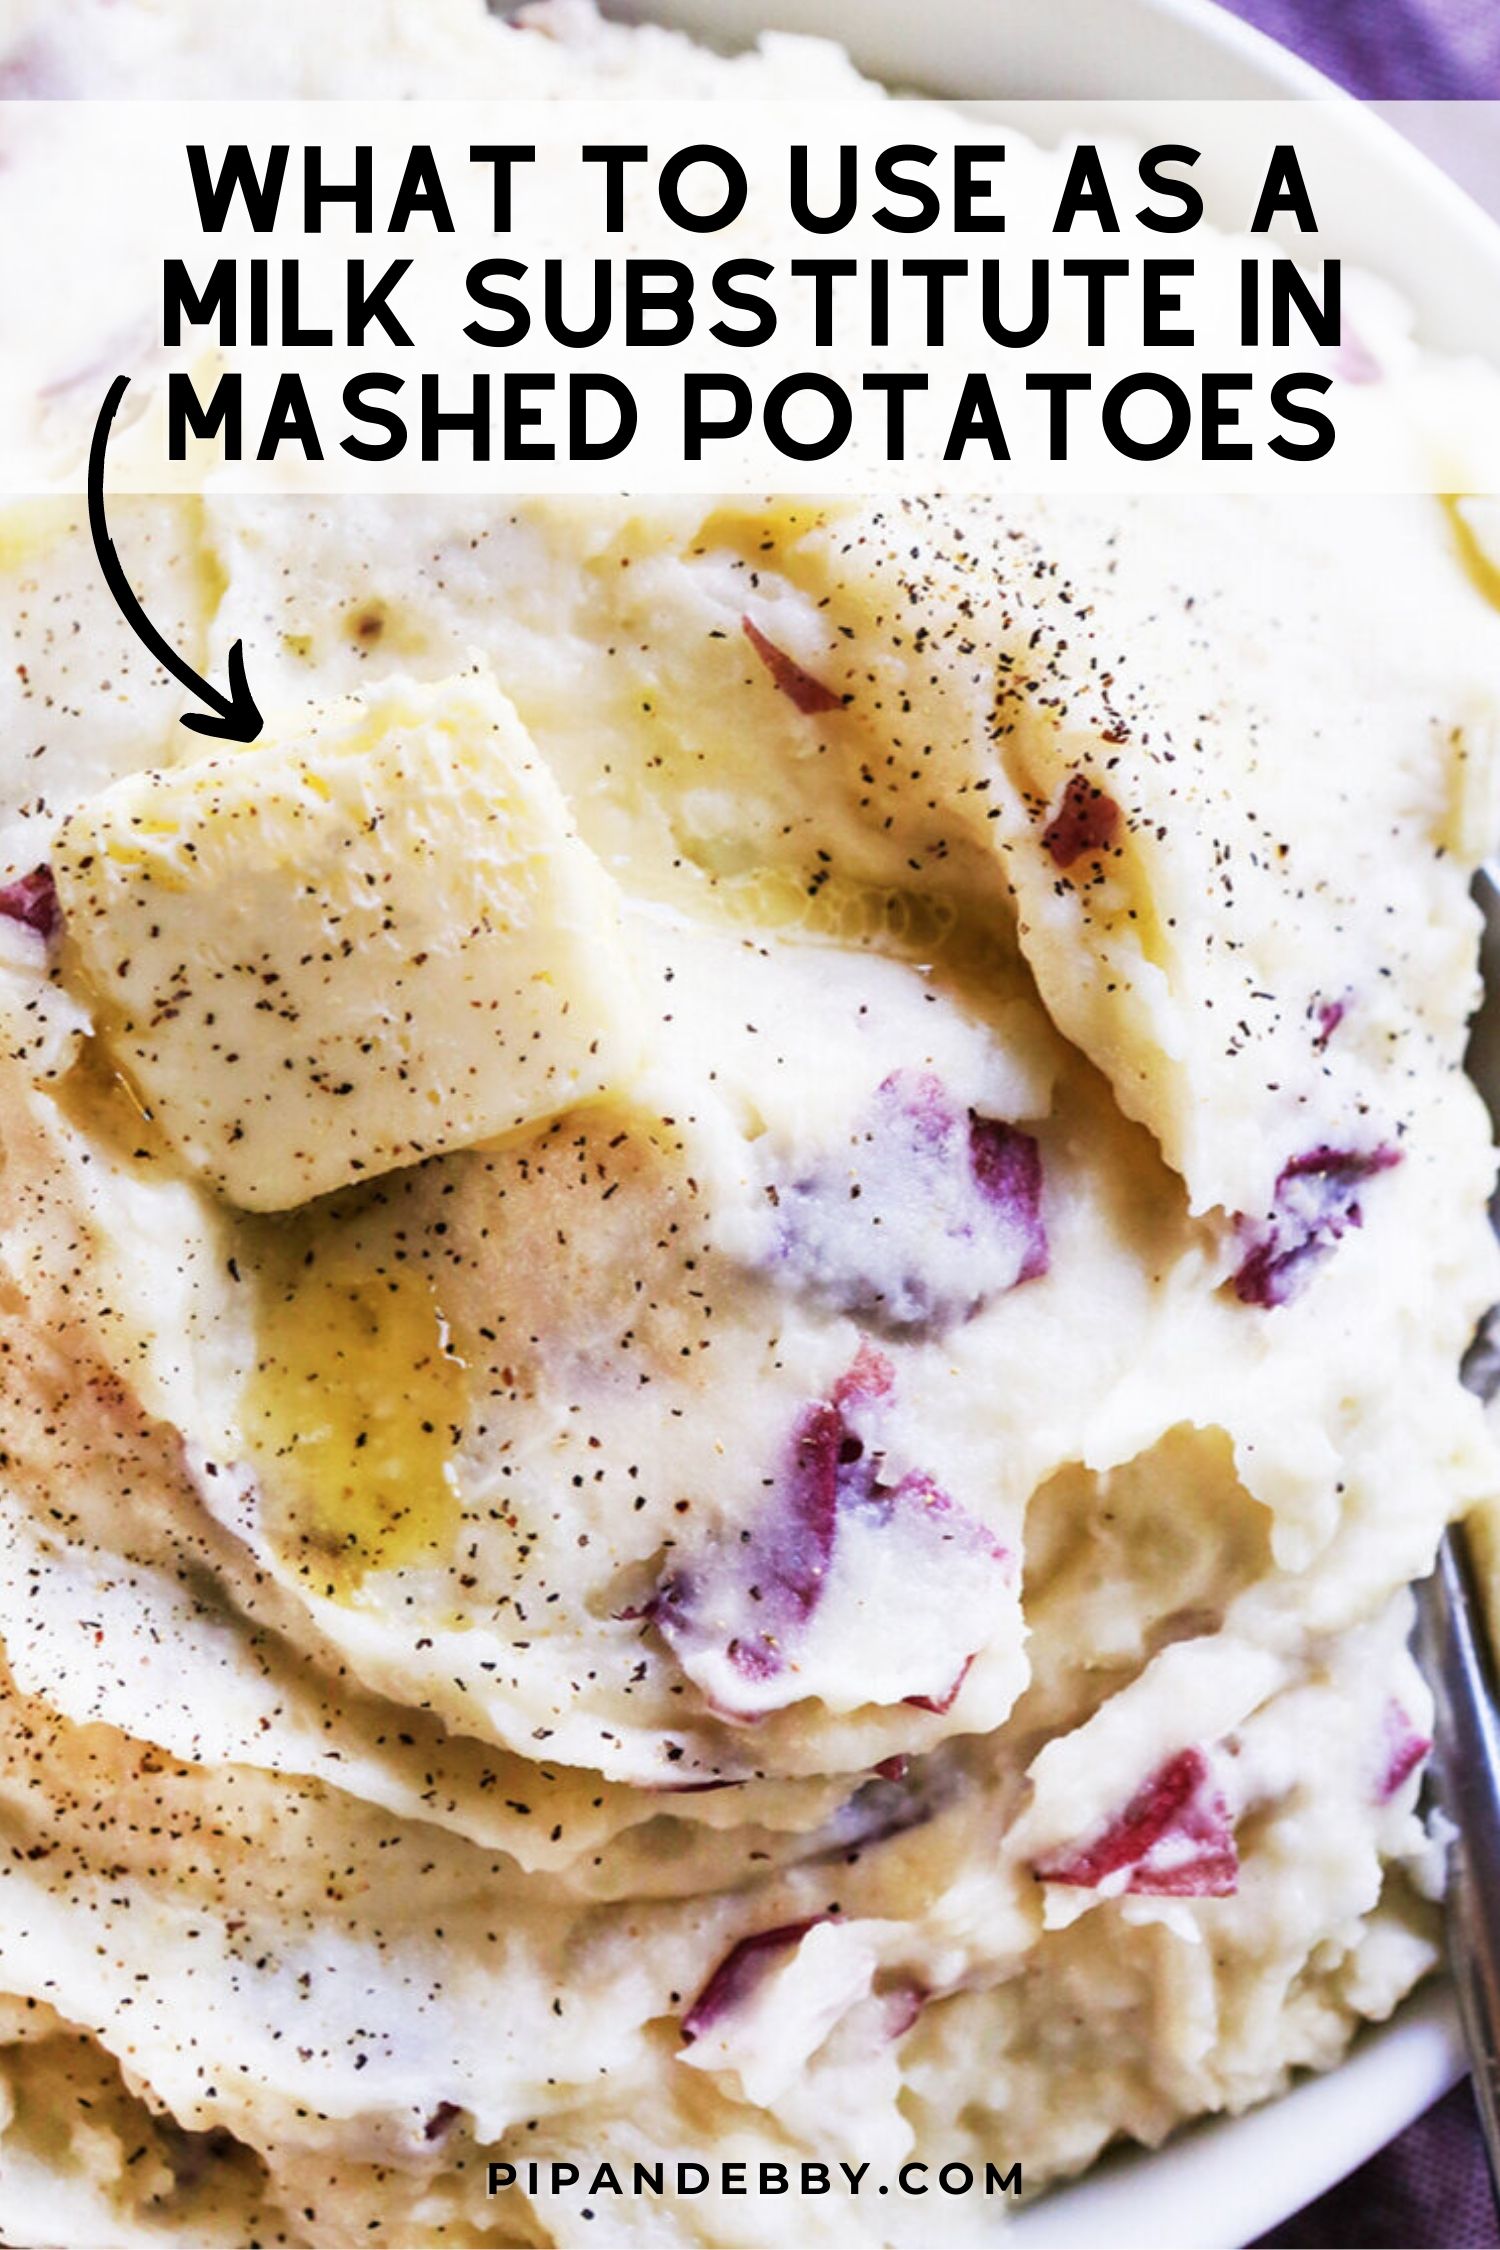 Close up photo of mashed potatoes and butter with text overlay reading, "What to use as a milk substitute in mashed potatoes."